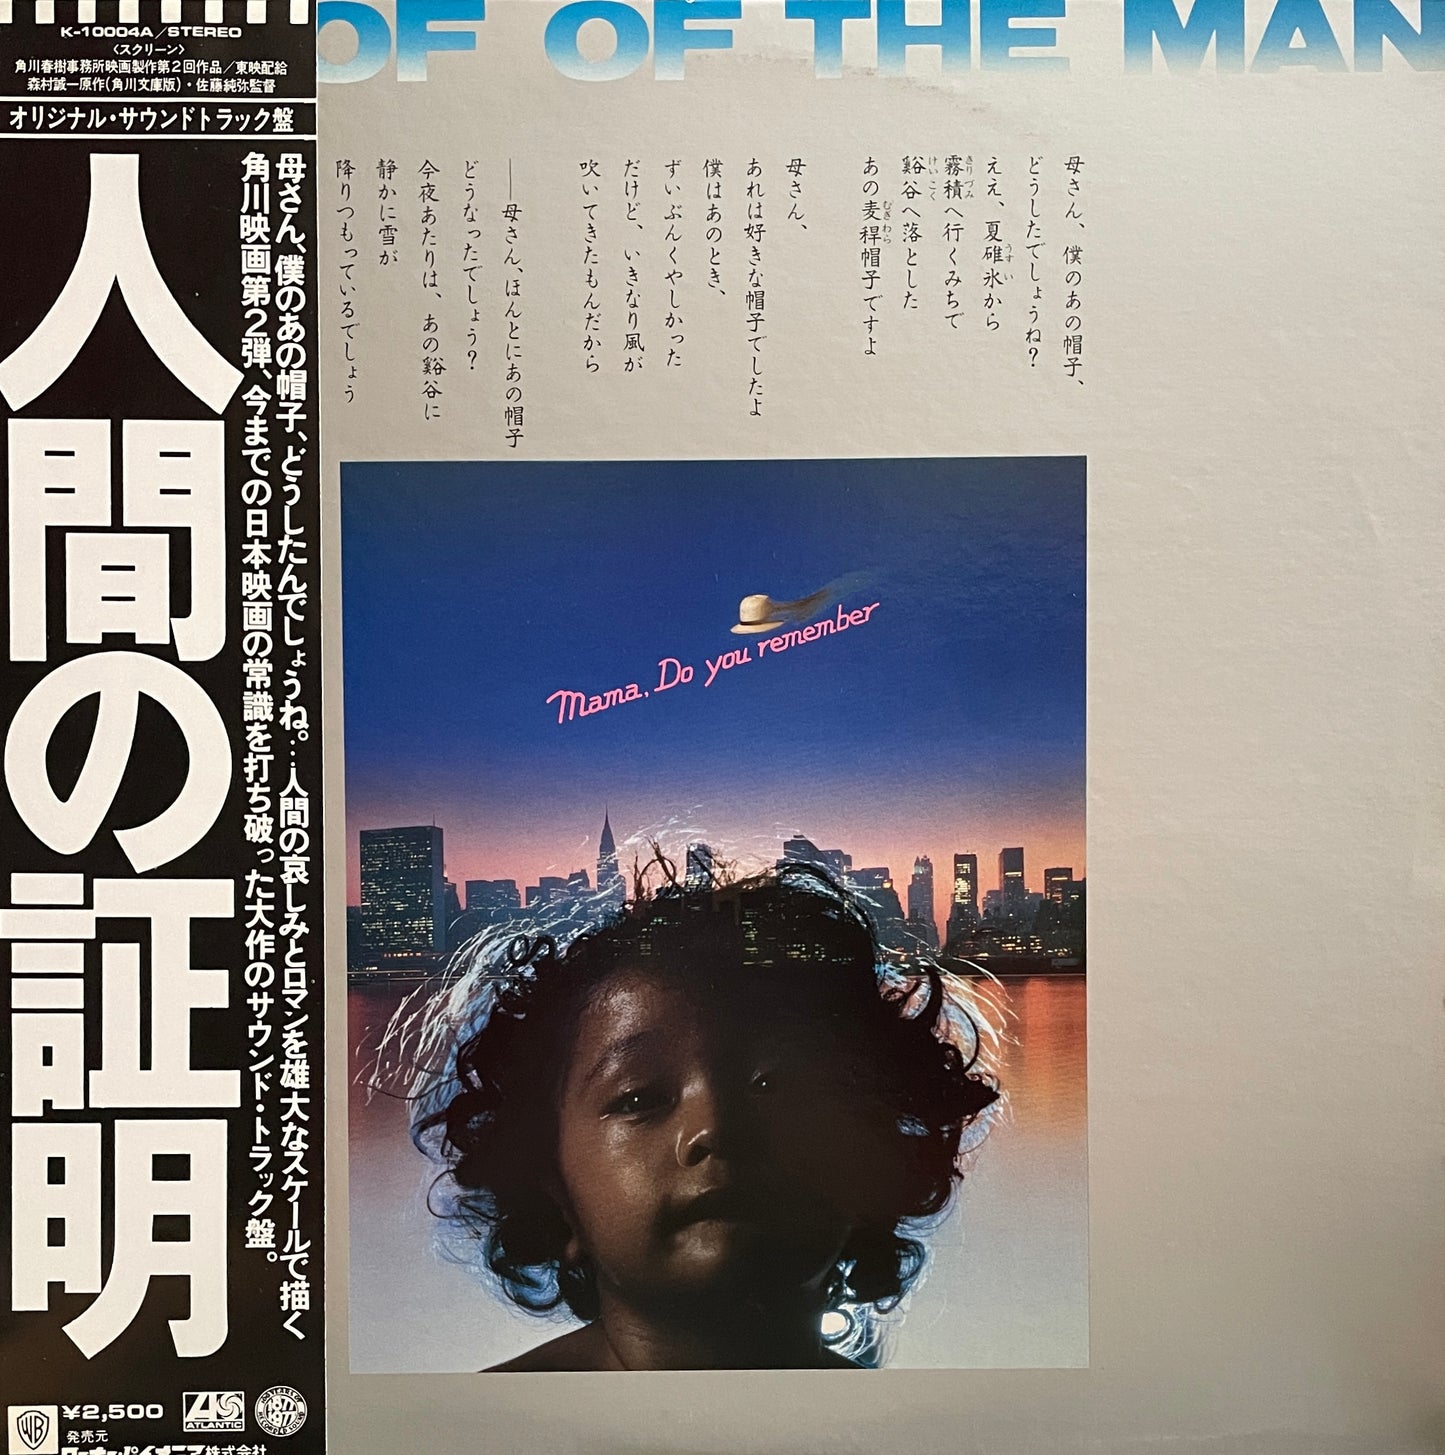 Yuji Ohno & His Project "Proof Of The Man" (1977)